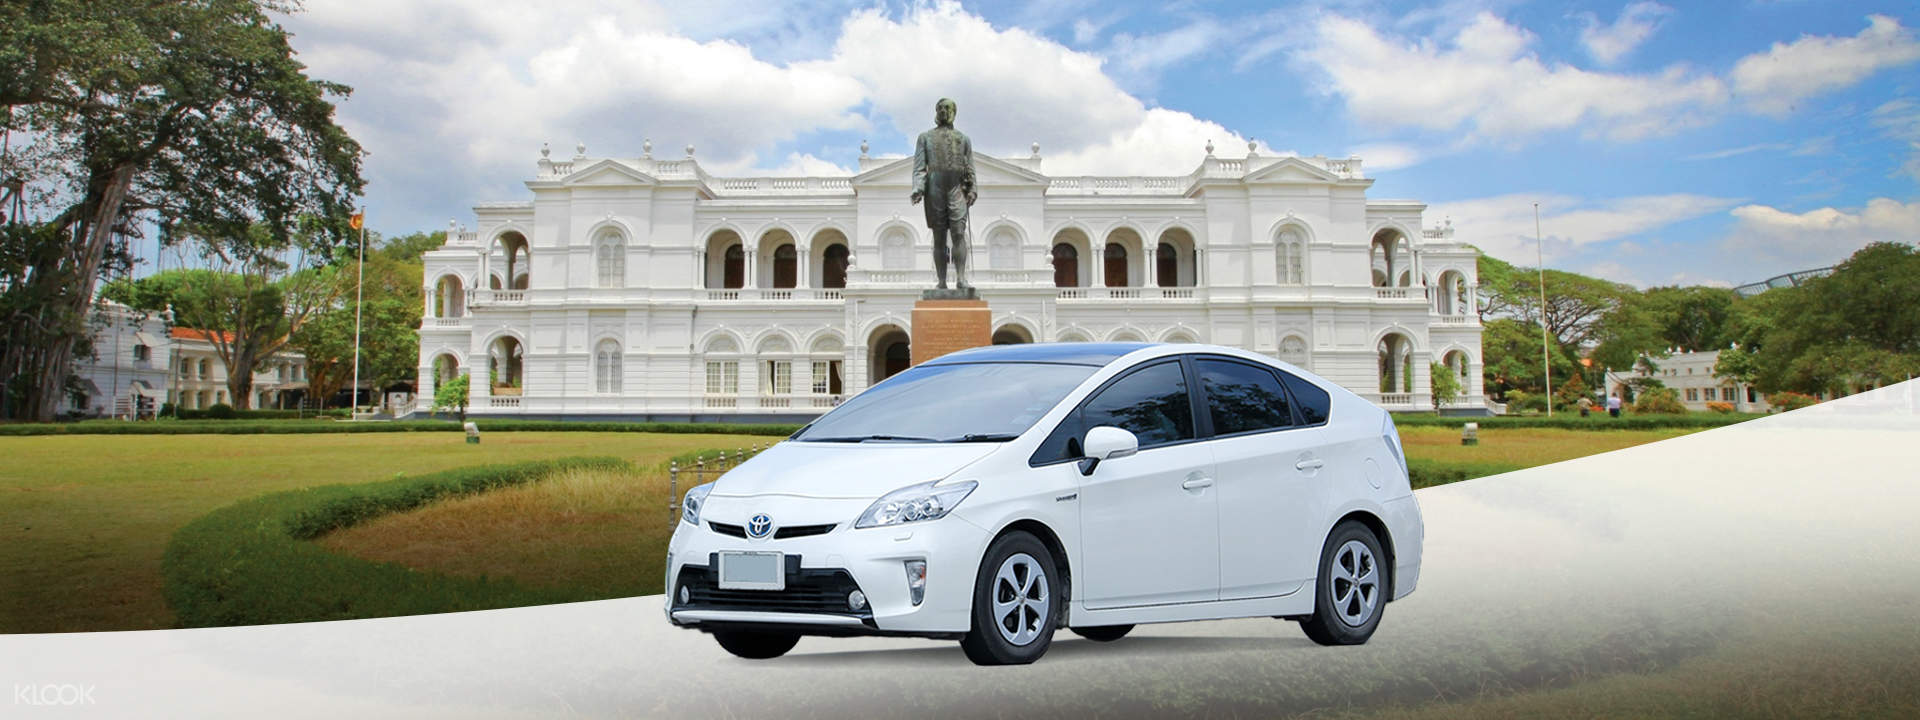 Colombo Private Car Charter